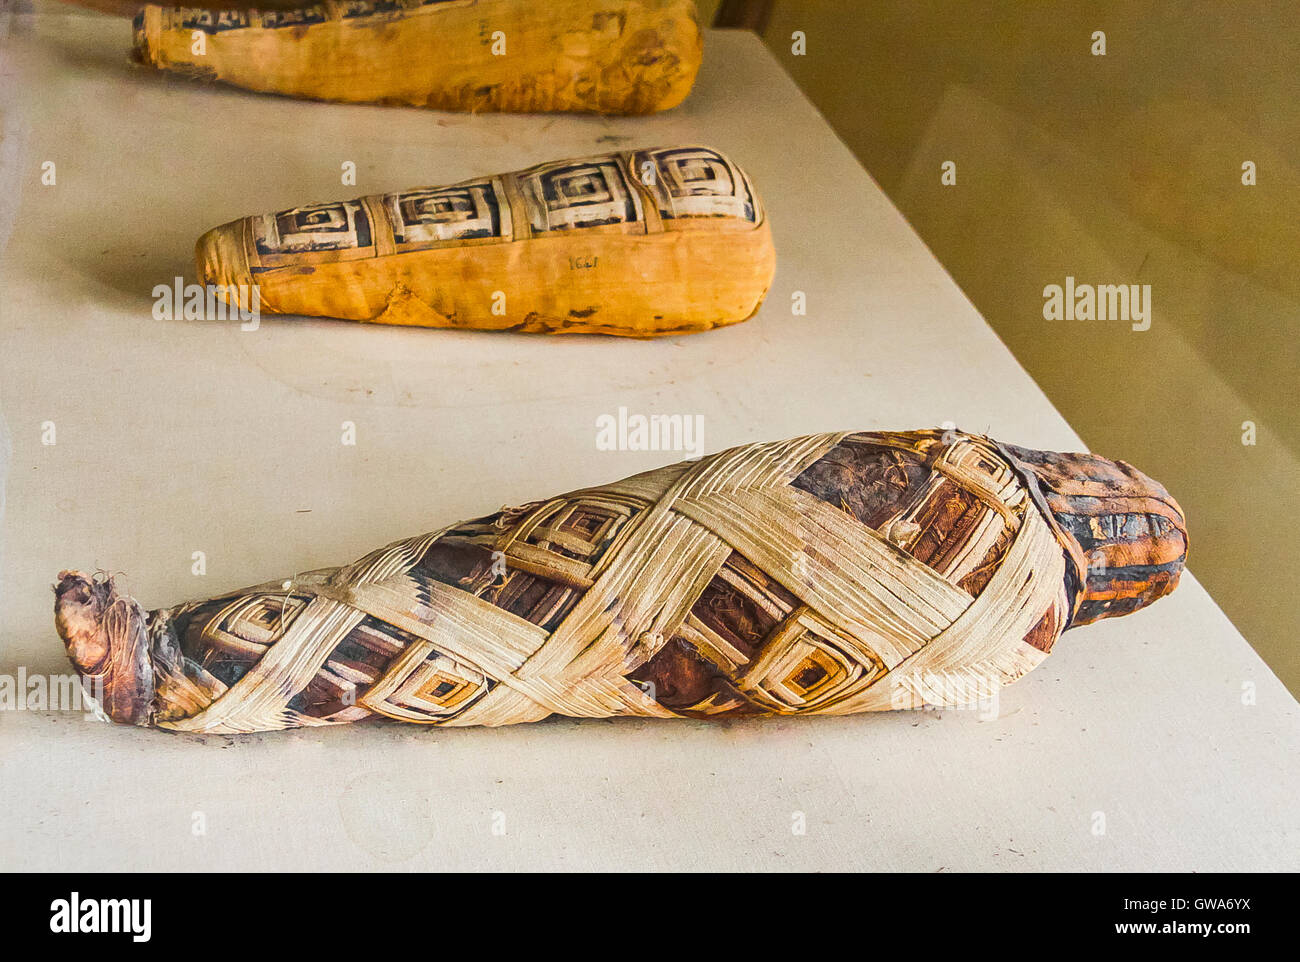 Egypt,, Museum of Mallawi, photos taken in 2009, before its looting in 2013. Ibis mummies. Stock Photo